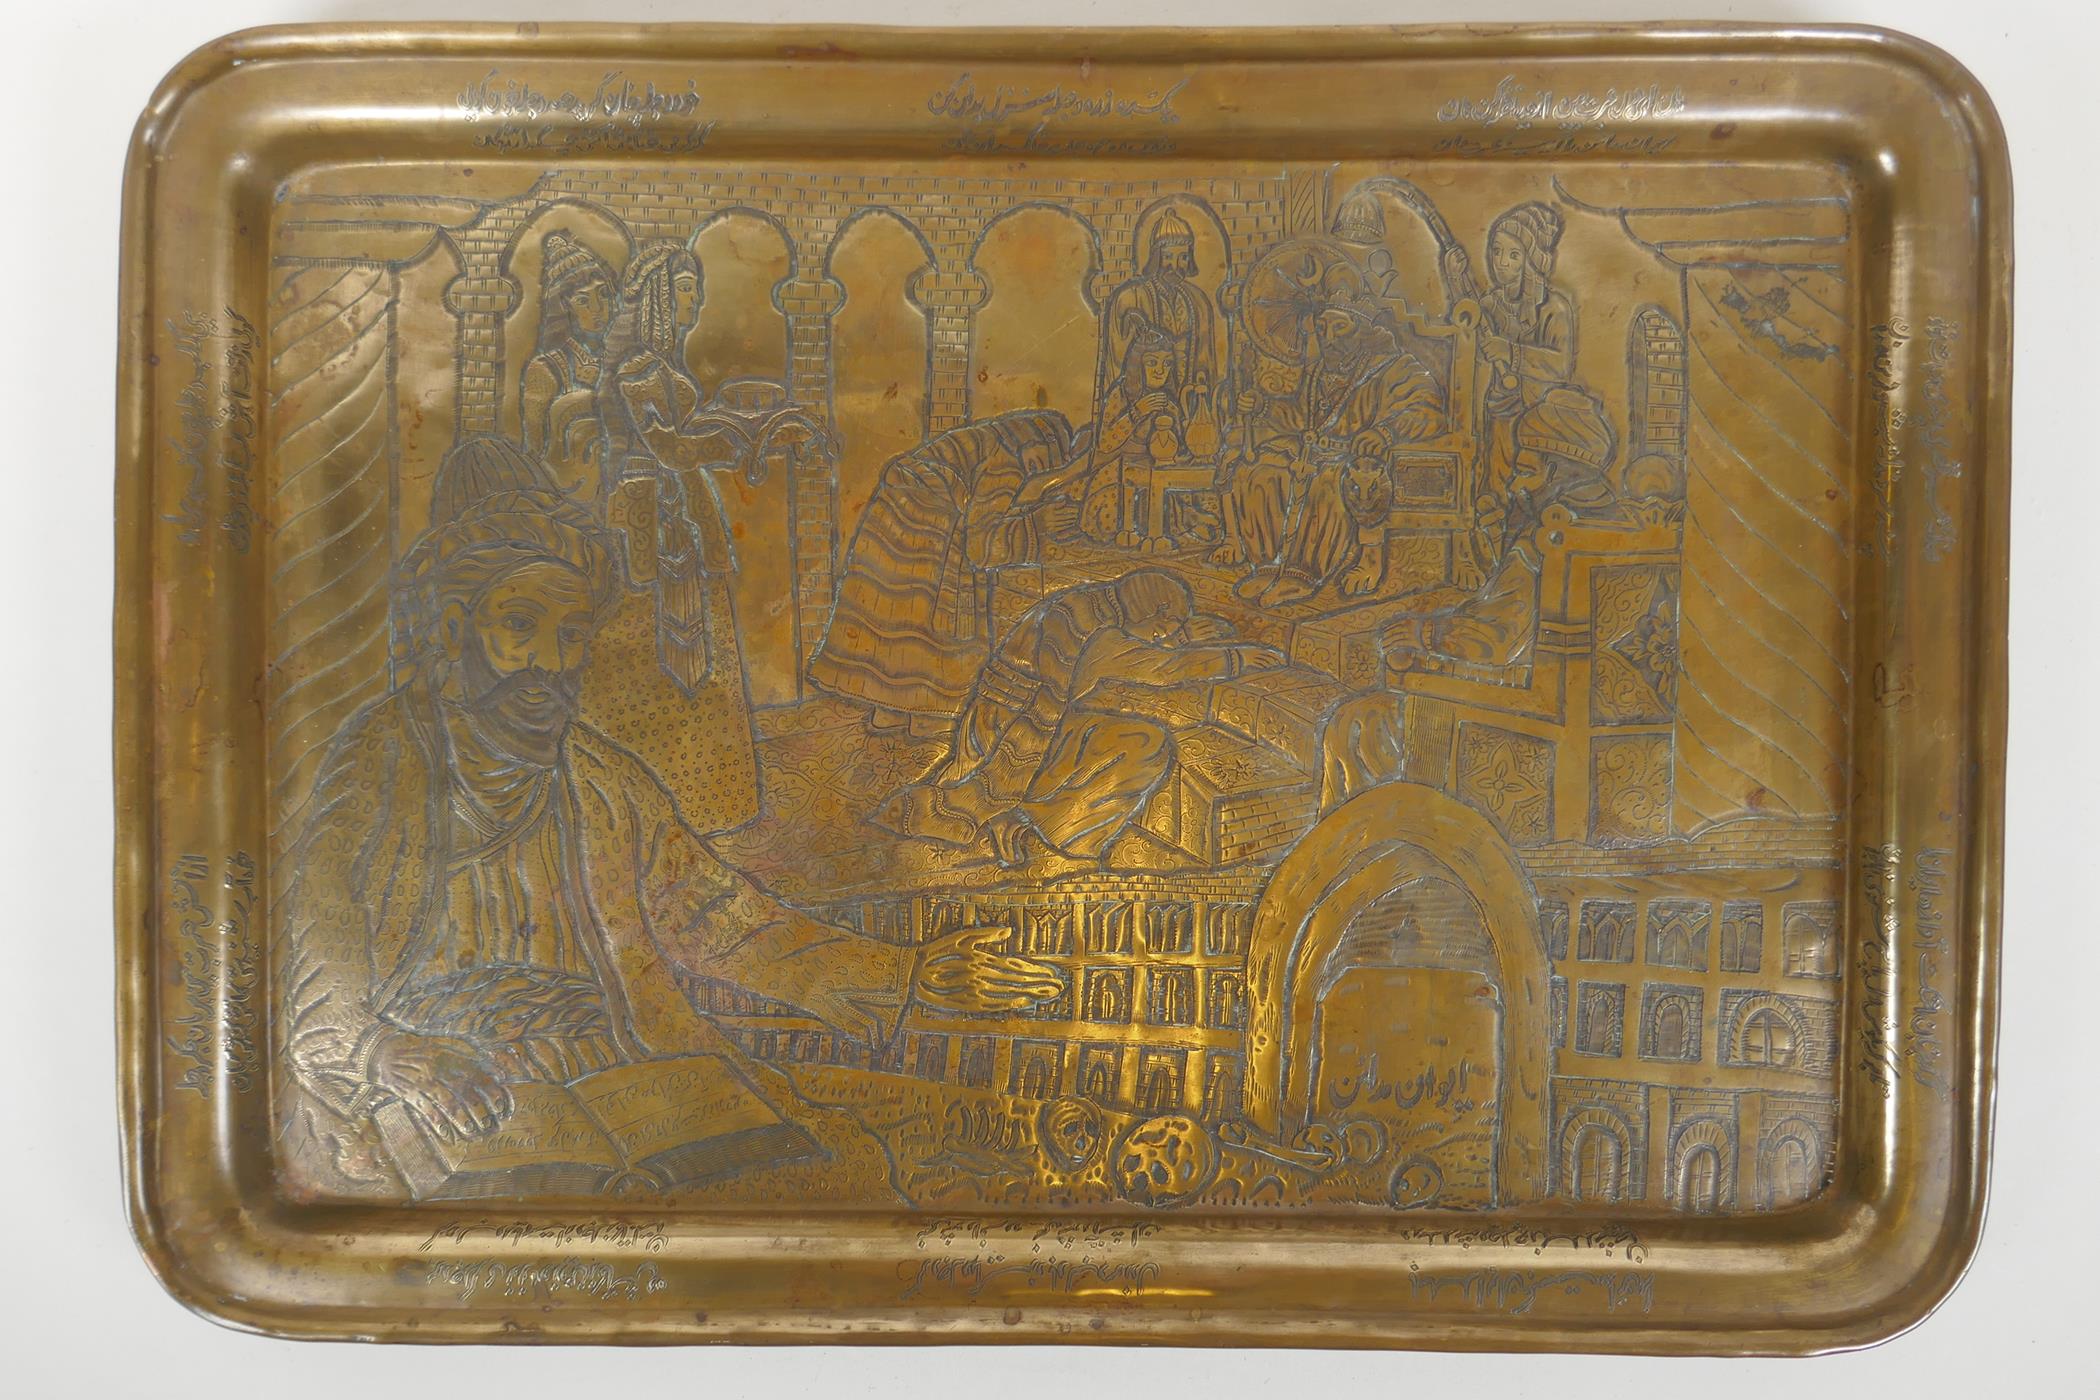 An antique Persian bronze tray with engraved decoration depicting the Kasra Arch and a king